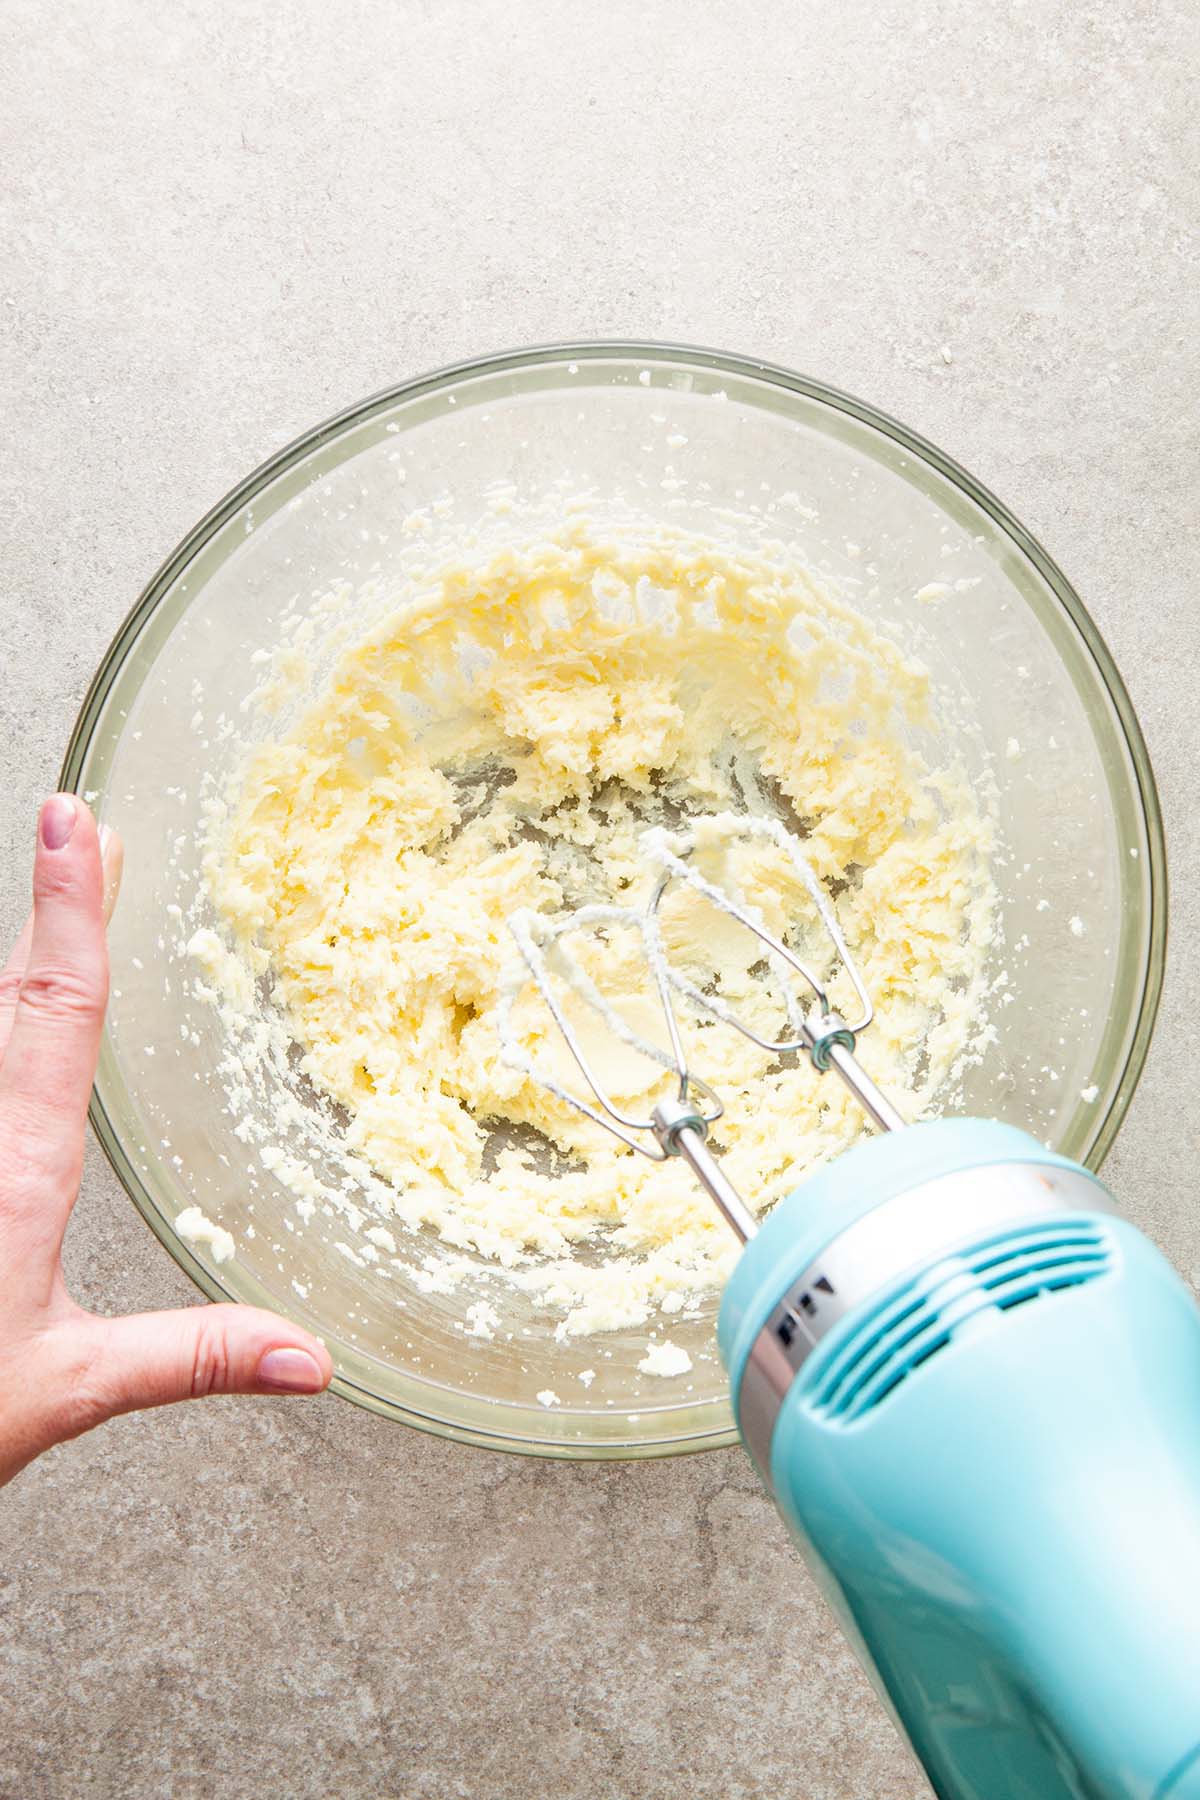 A hand using a hand mixer to cream butter and sugar.